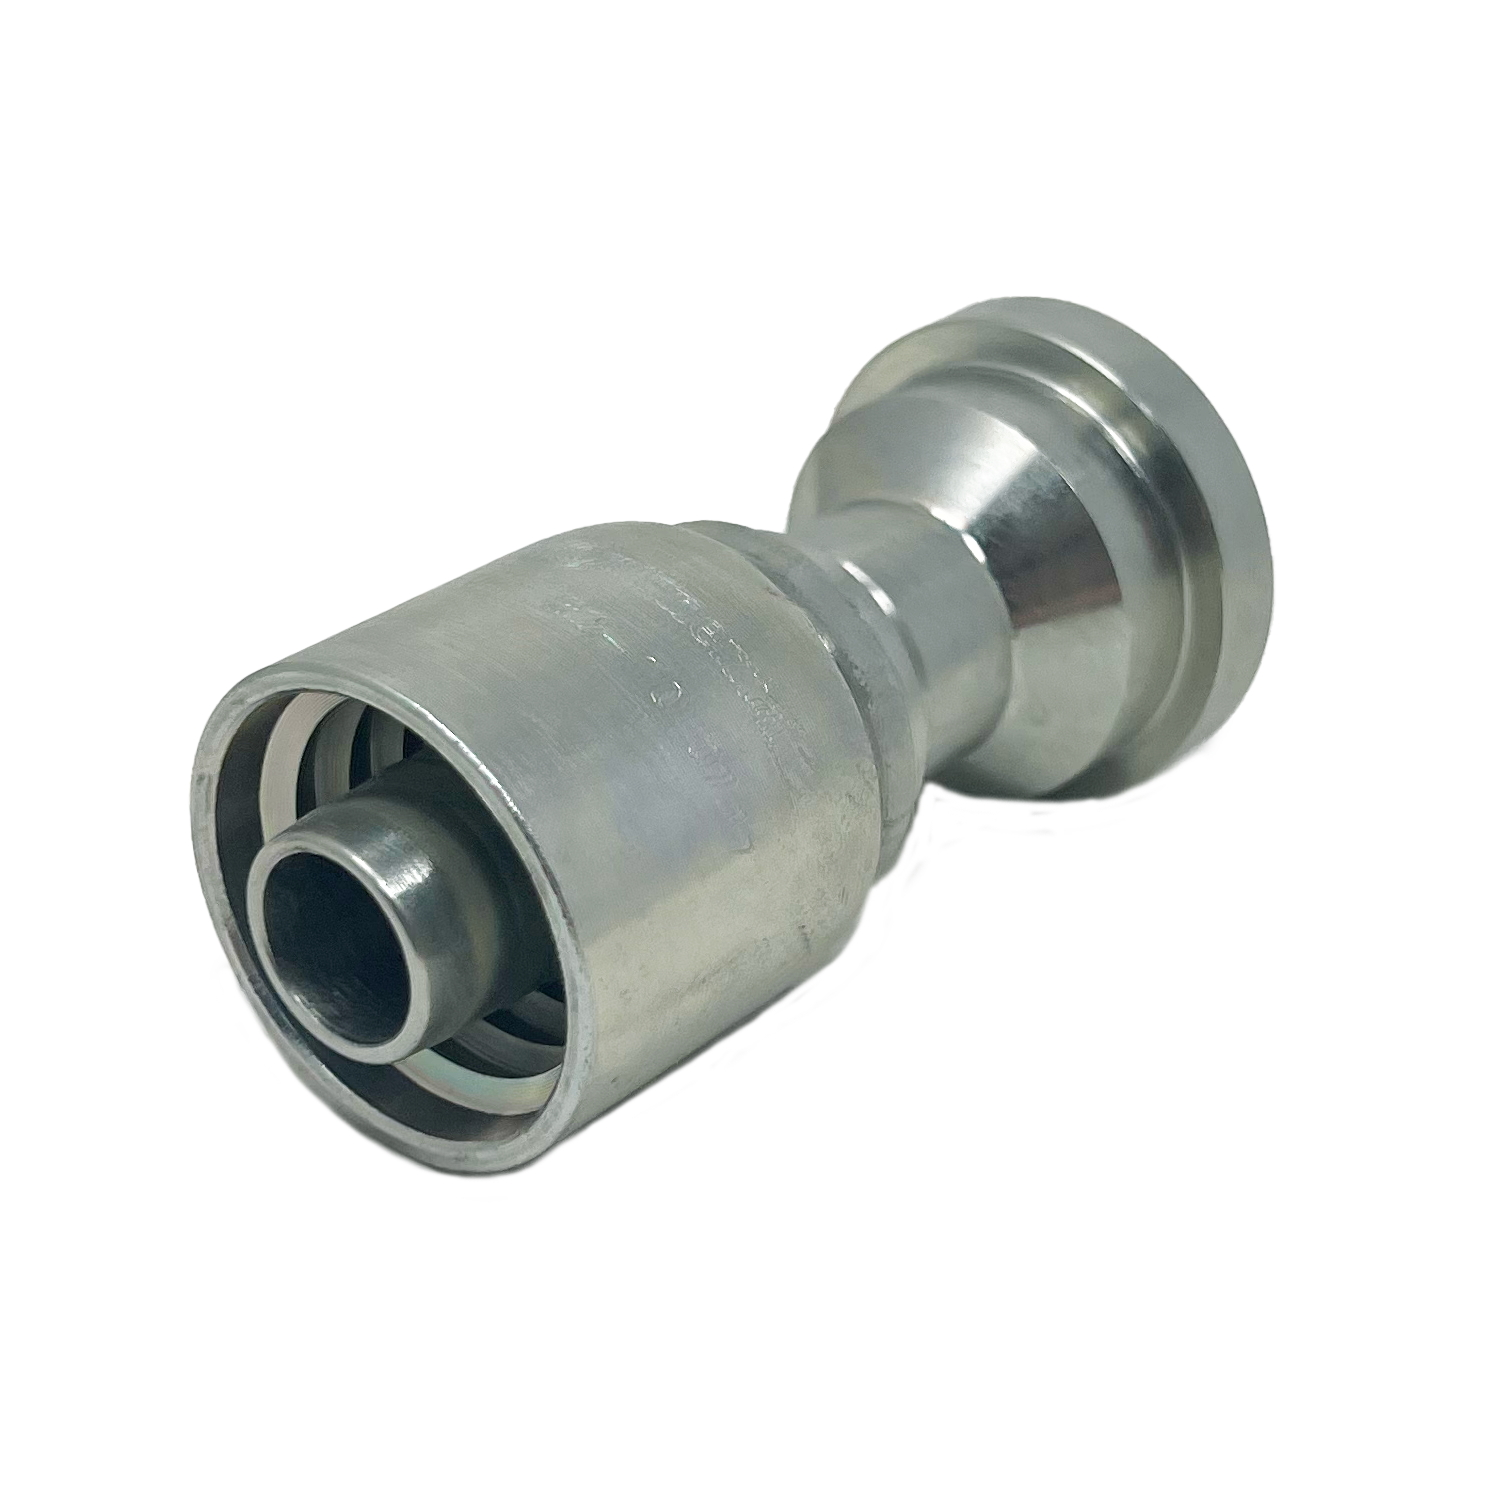 B2-FL-1012: Continental Hose Fitting, 0.625 (5/8") Hose ID x 0.75 (3/4") Code 61, Straight Connection